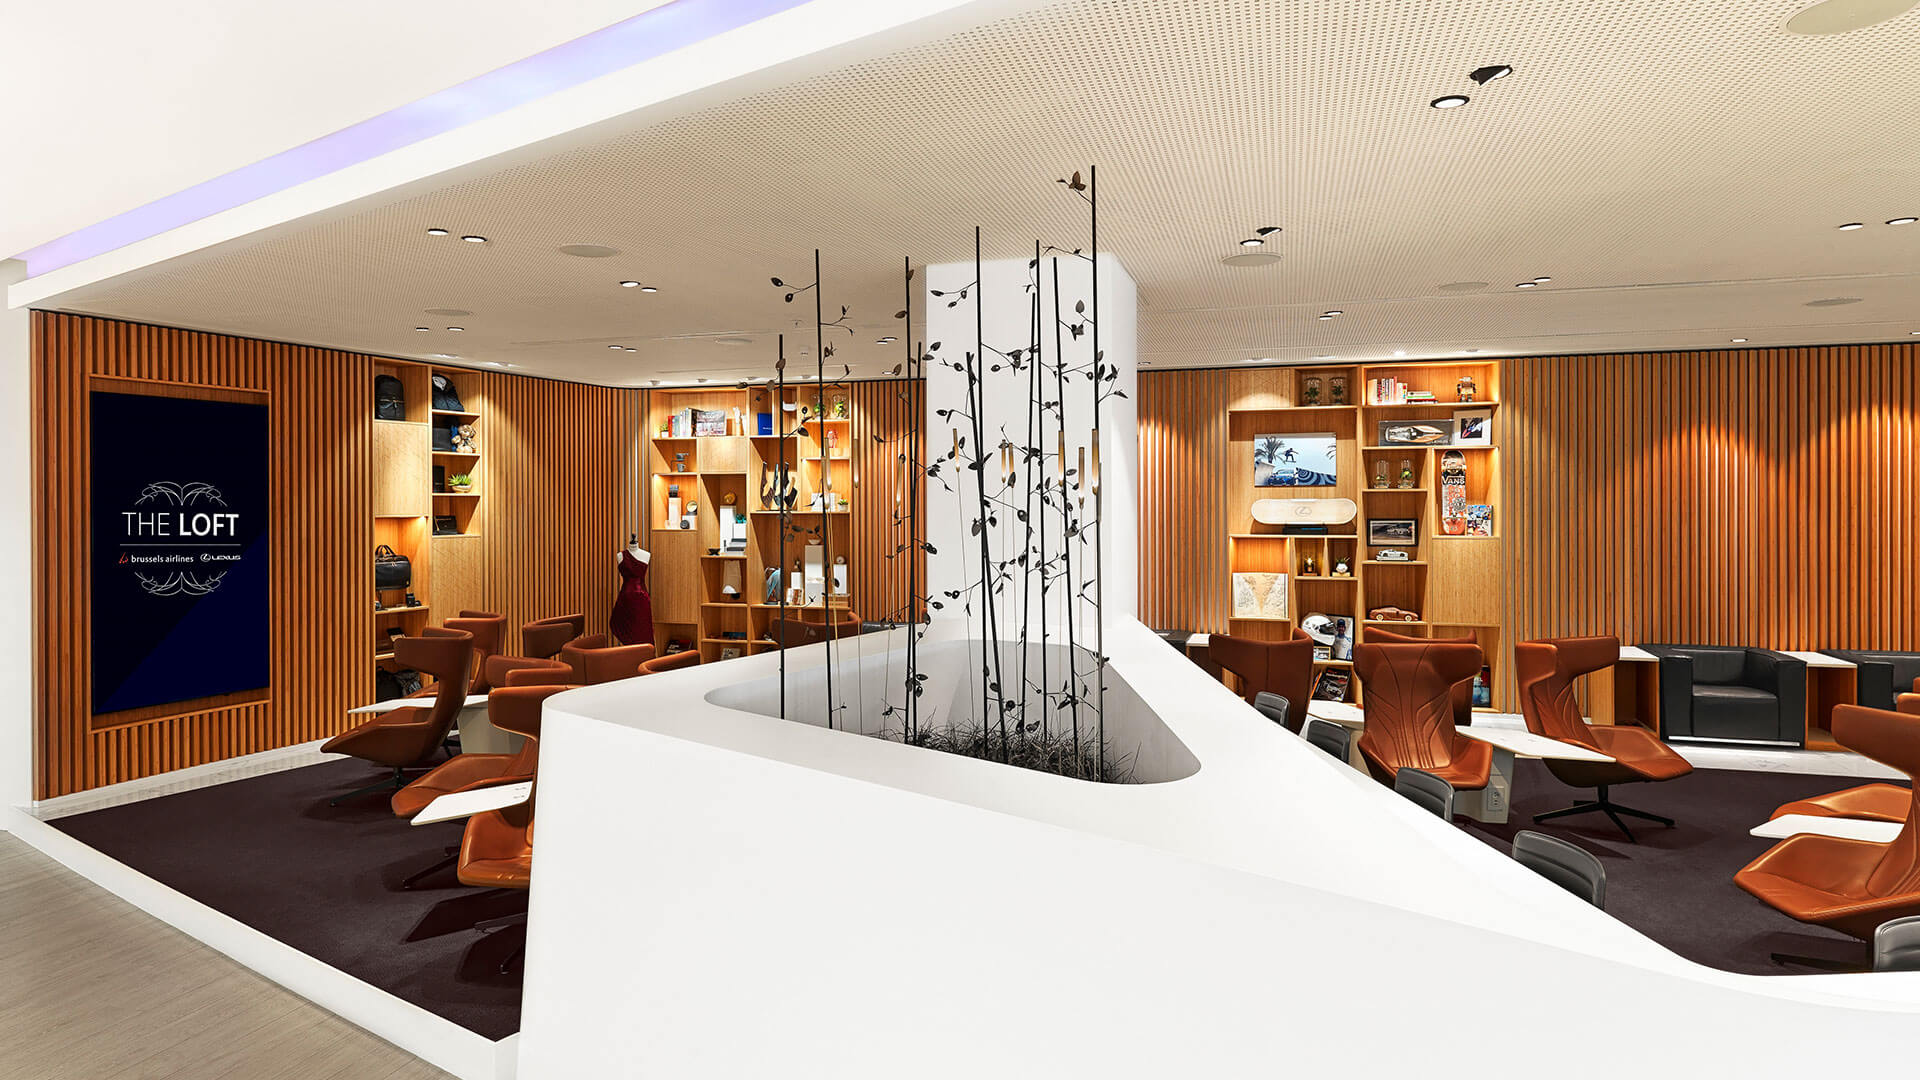 THE LOFT BY BRUSSELS AIRLINES AND LEXUS AT BRUSSELS AIRPORT NAMED “EUROPE’S LEADING AIRLINE LOUNGE 2020” FOR SECOND CONSECUTIVE TIME